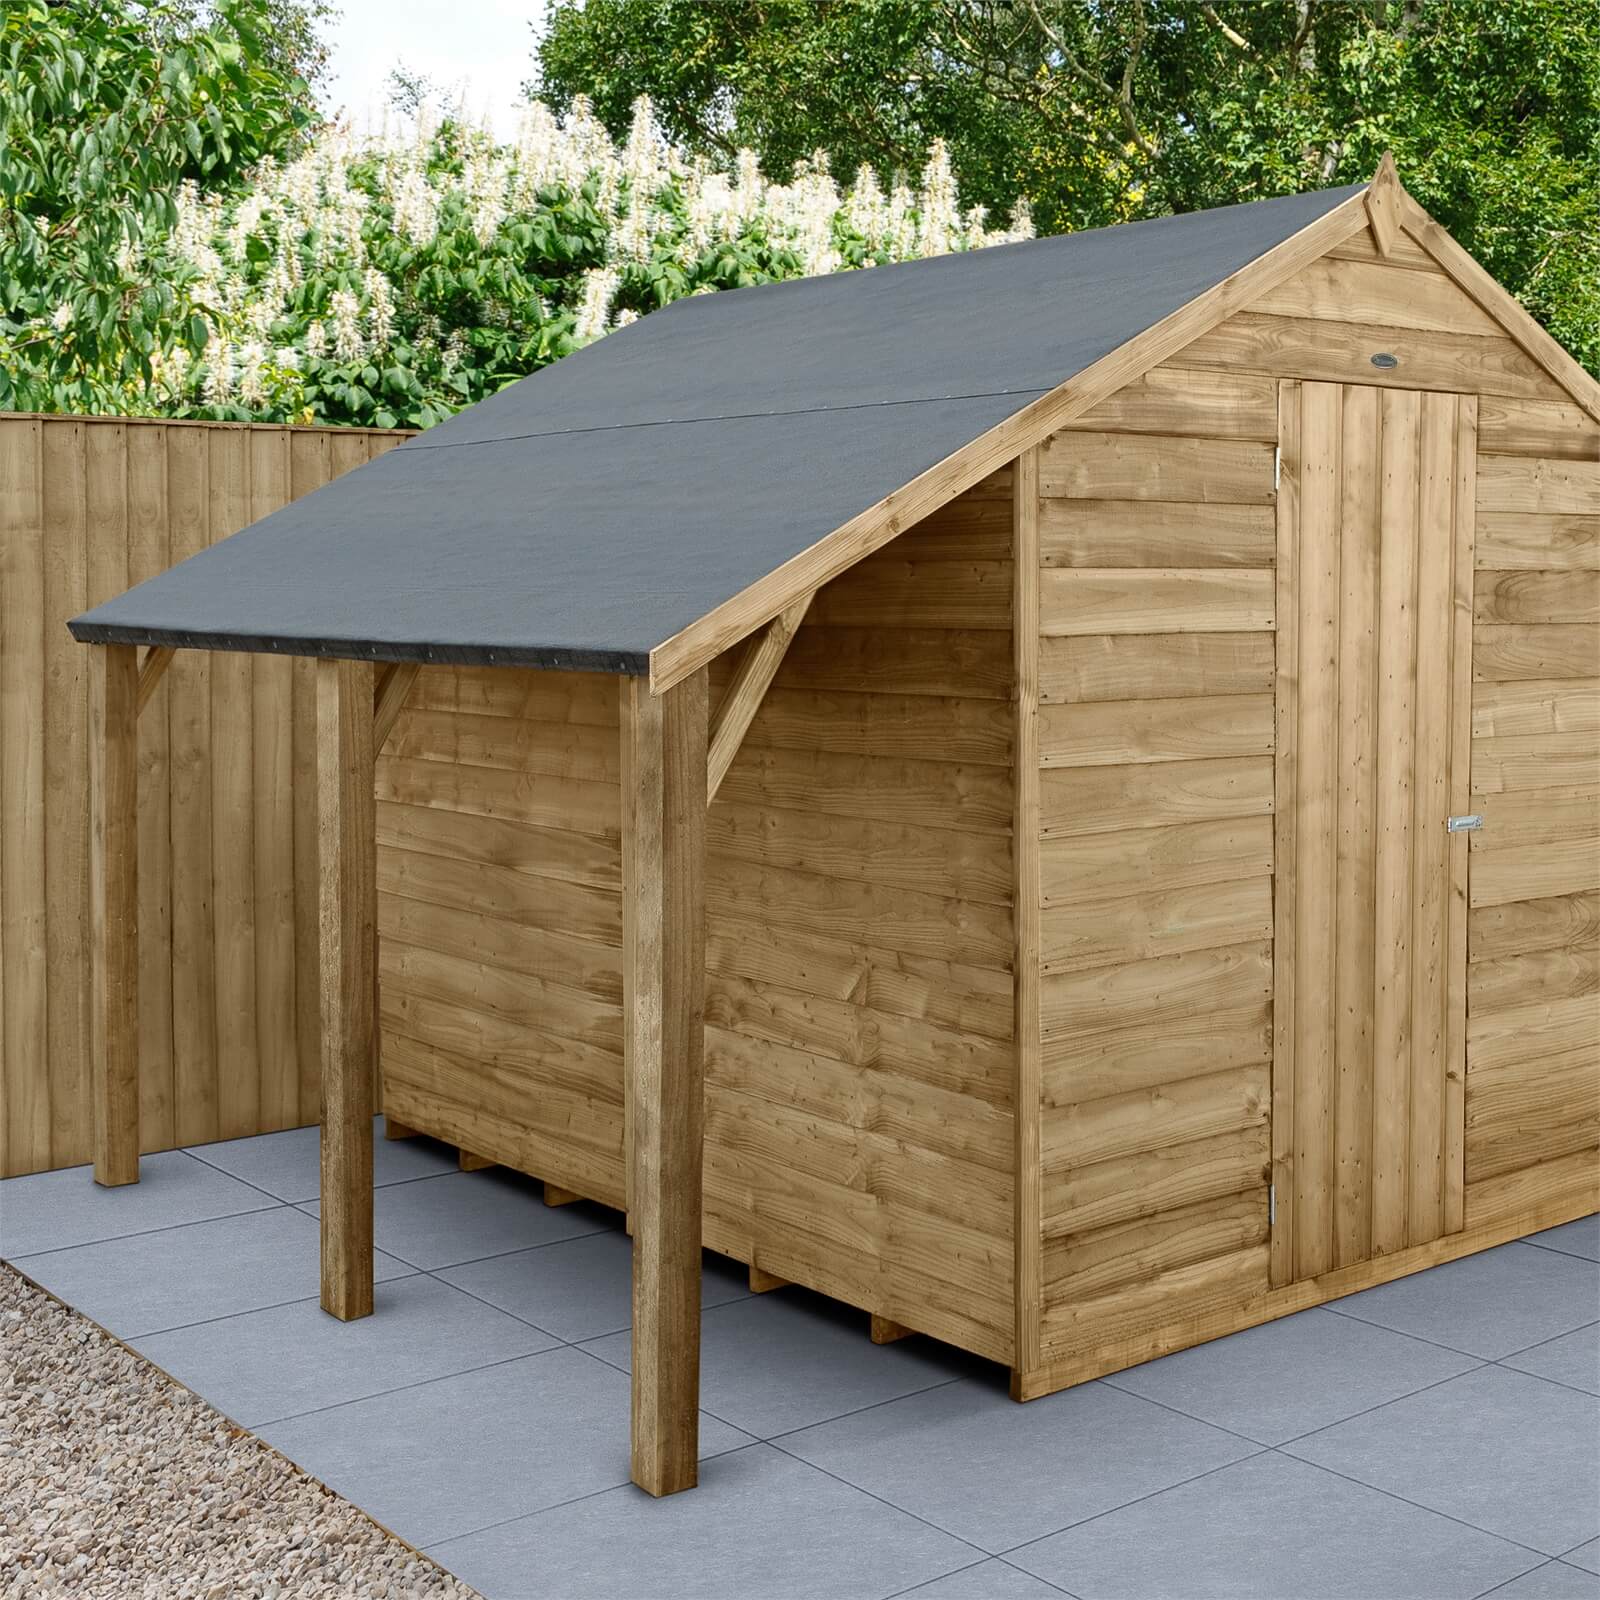 Forest Lean To Shed Kit for 8 x 6ft Overlap Pressure Treated Sheds